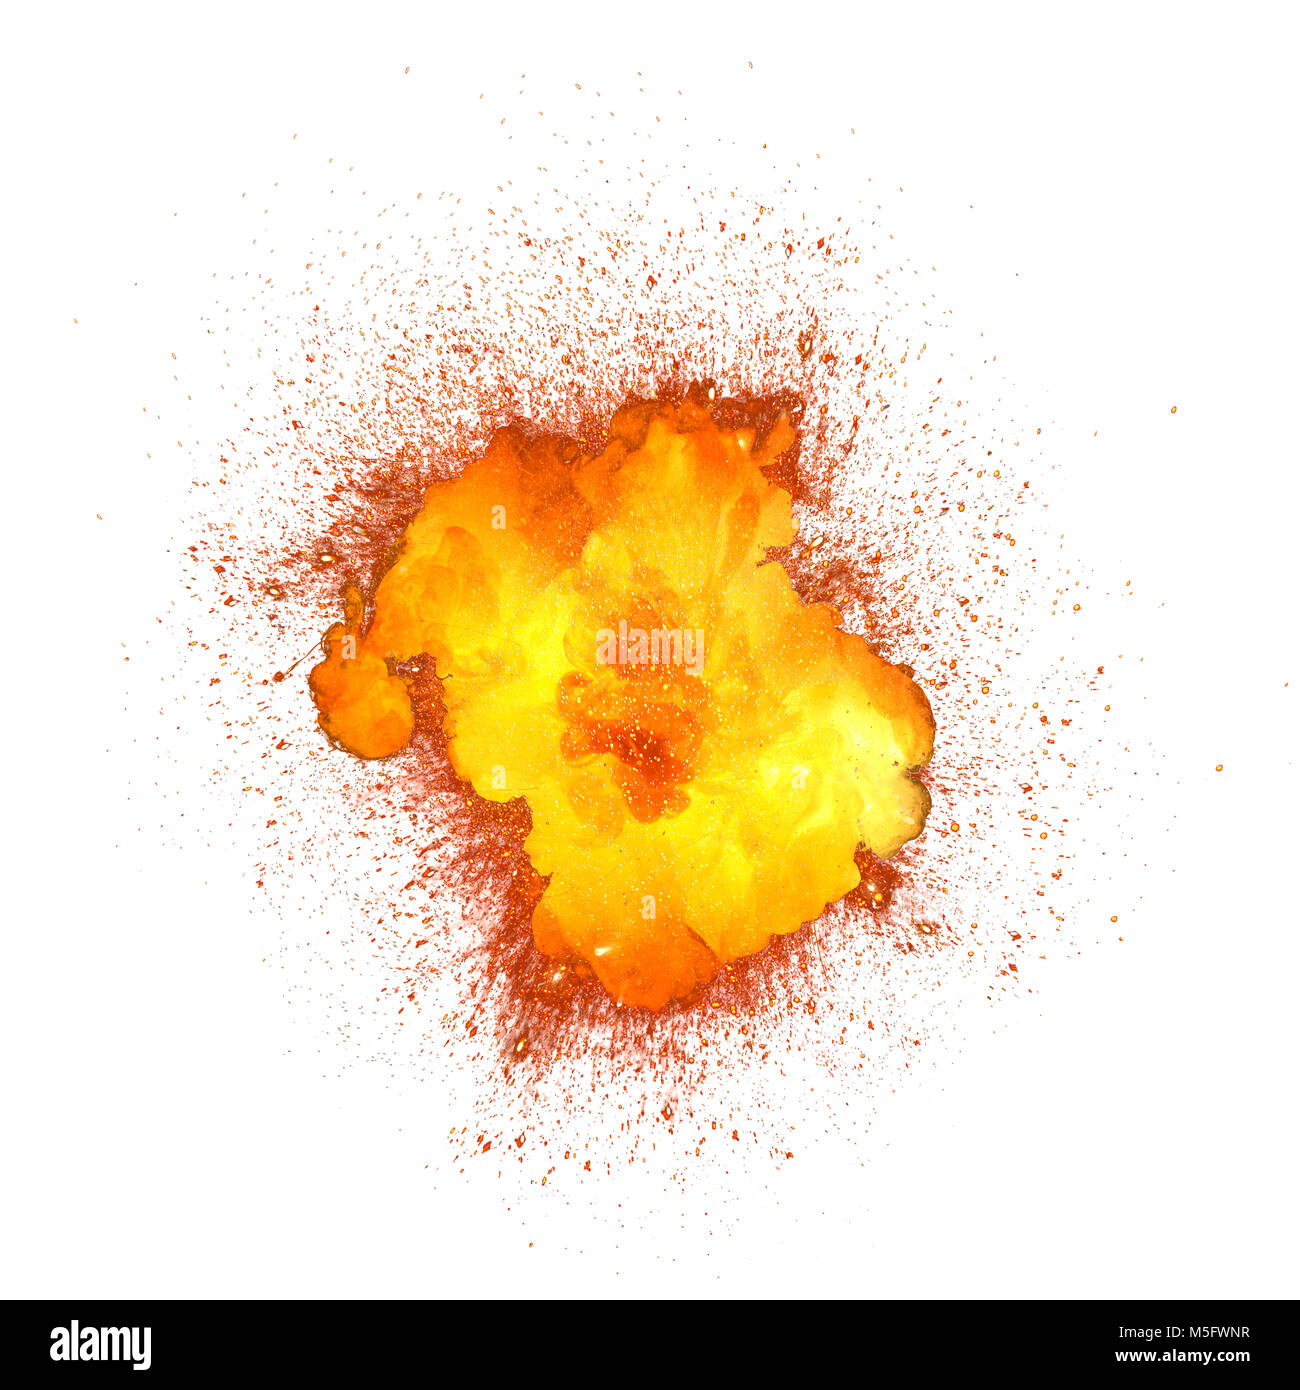 Realistic fiery explosion, orange color with sparks isolated on white background Stock Photo